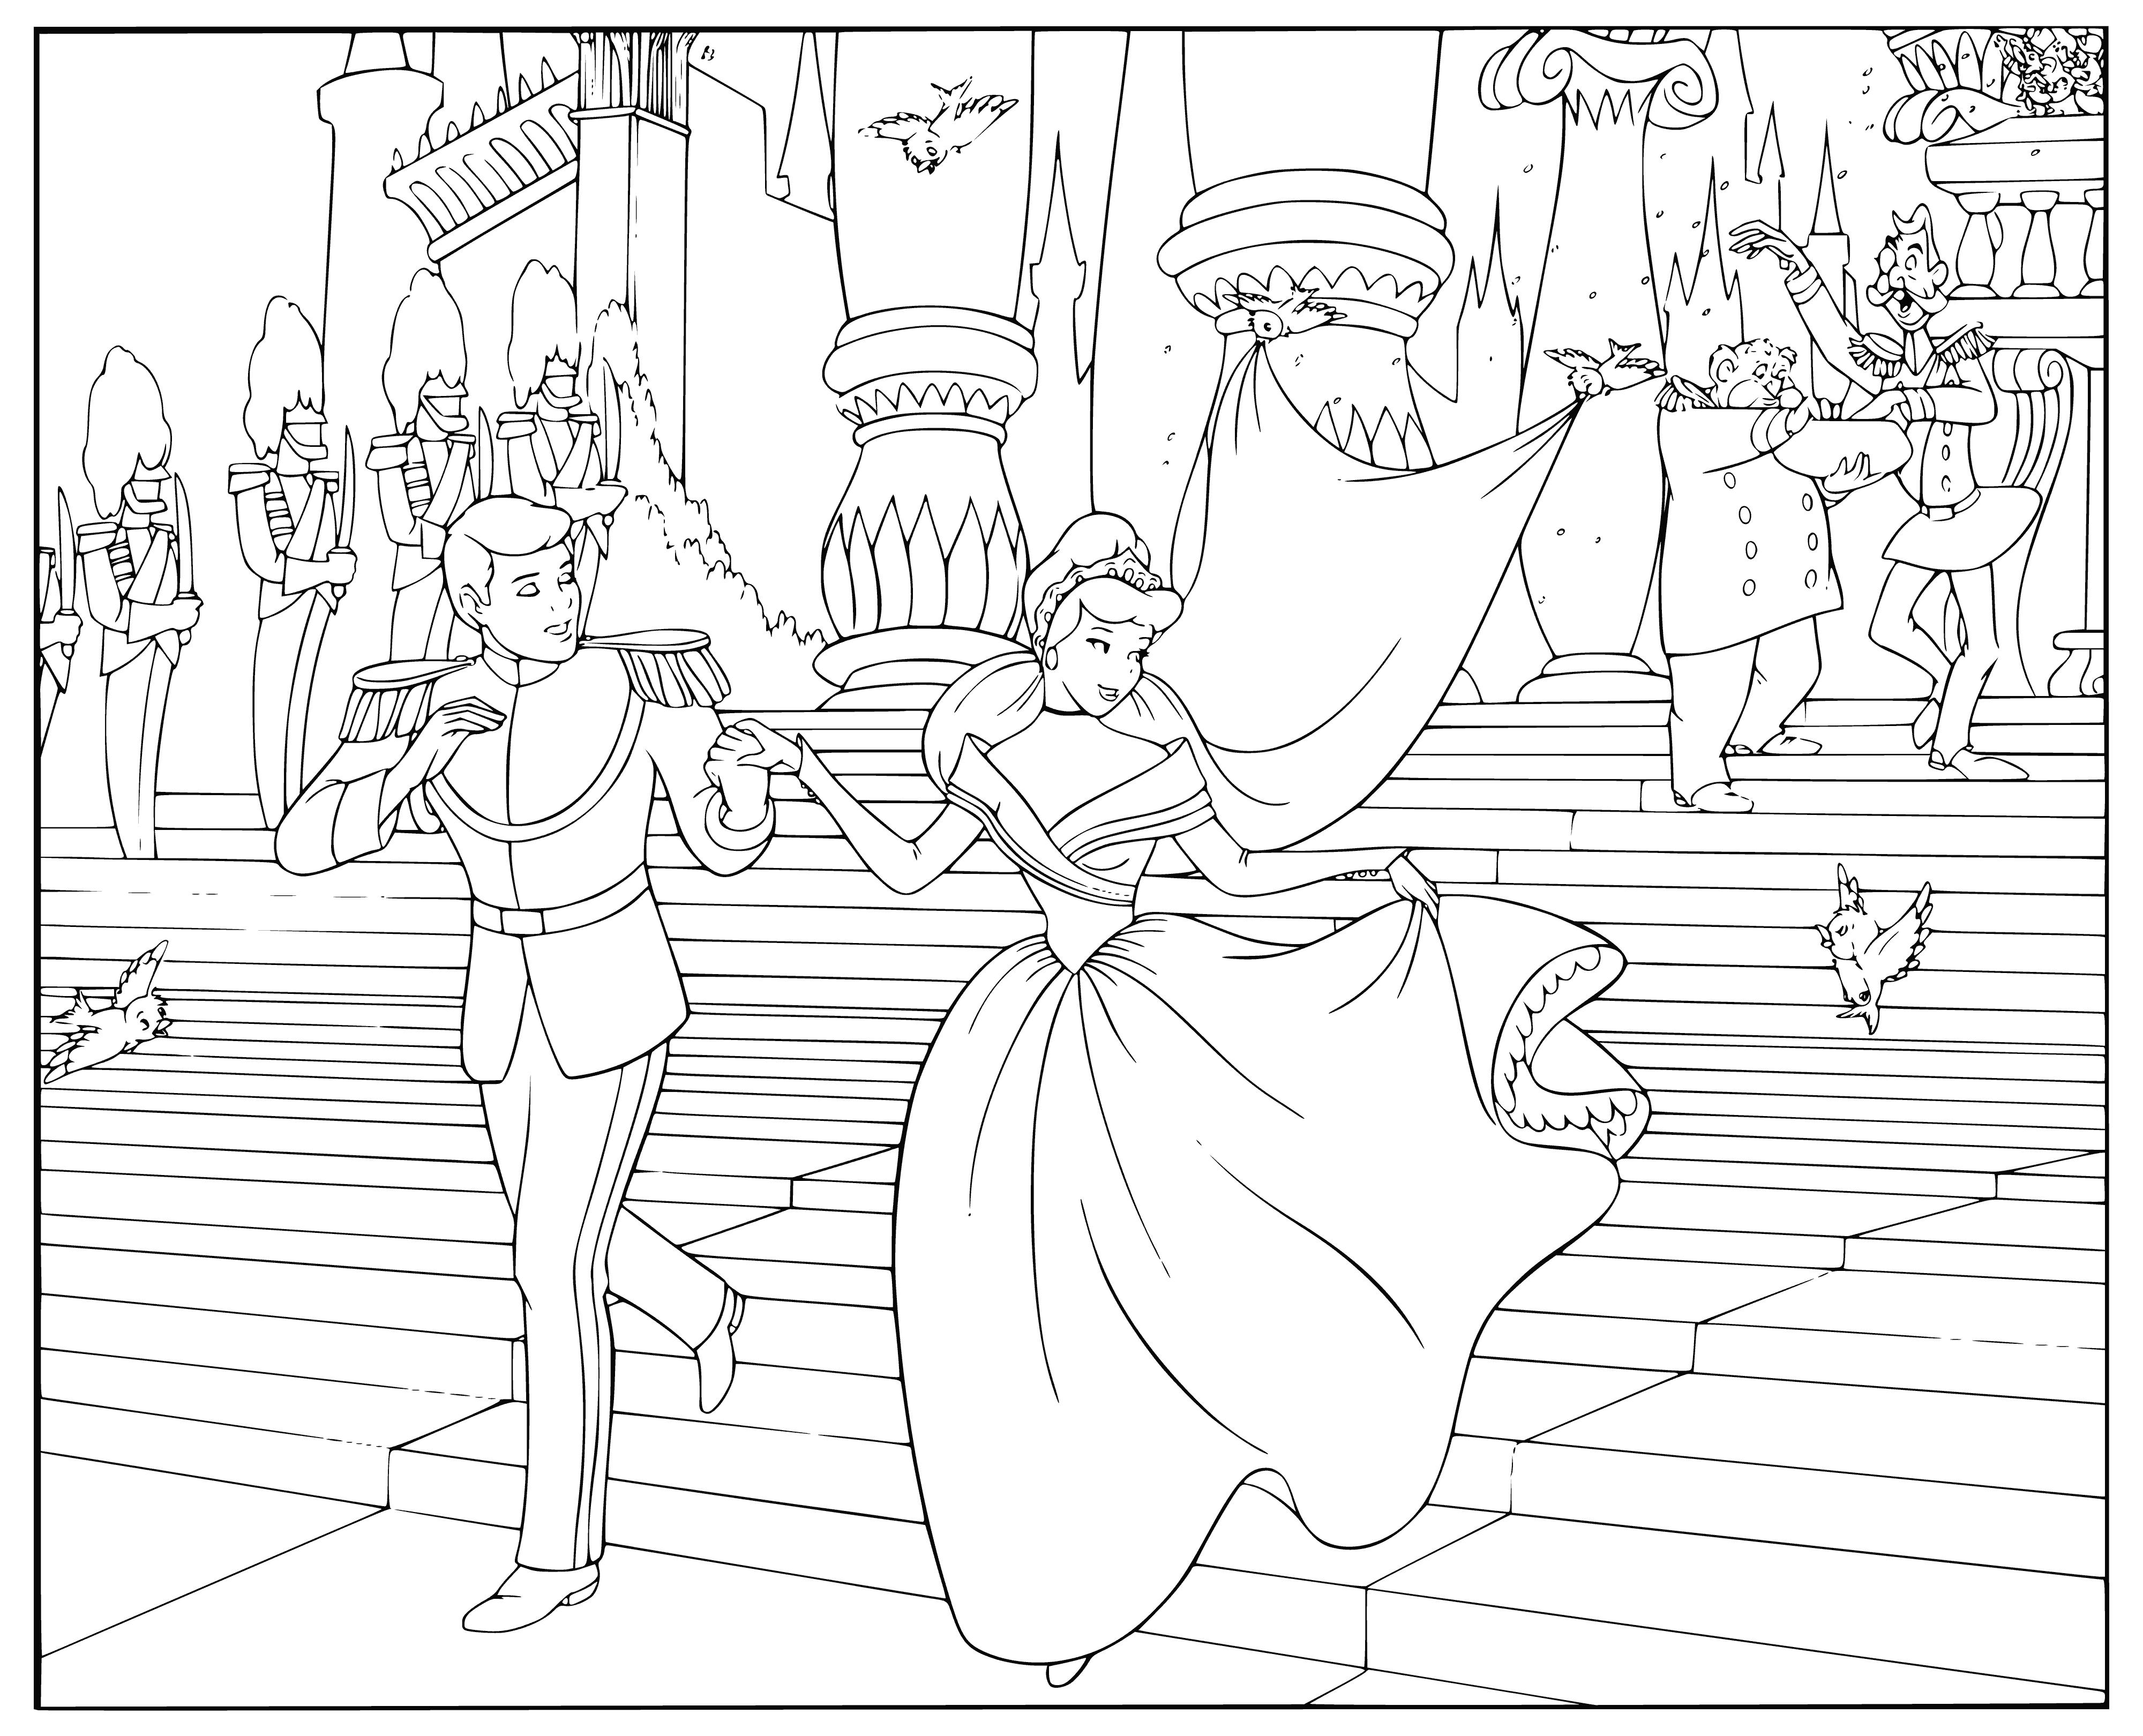 coloring page: --> The Prince & Cinderella are getting married! She's in a white dress & he's in a suit - they're both smiling & happy, while guests mingle & throw confetti. A wonderful day ahead!